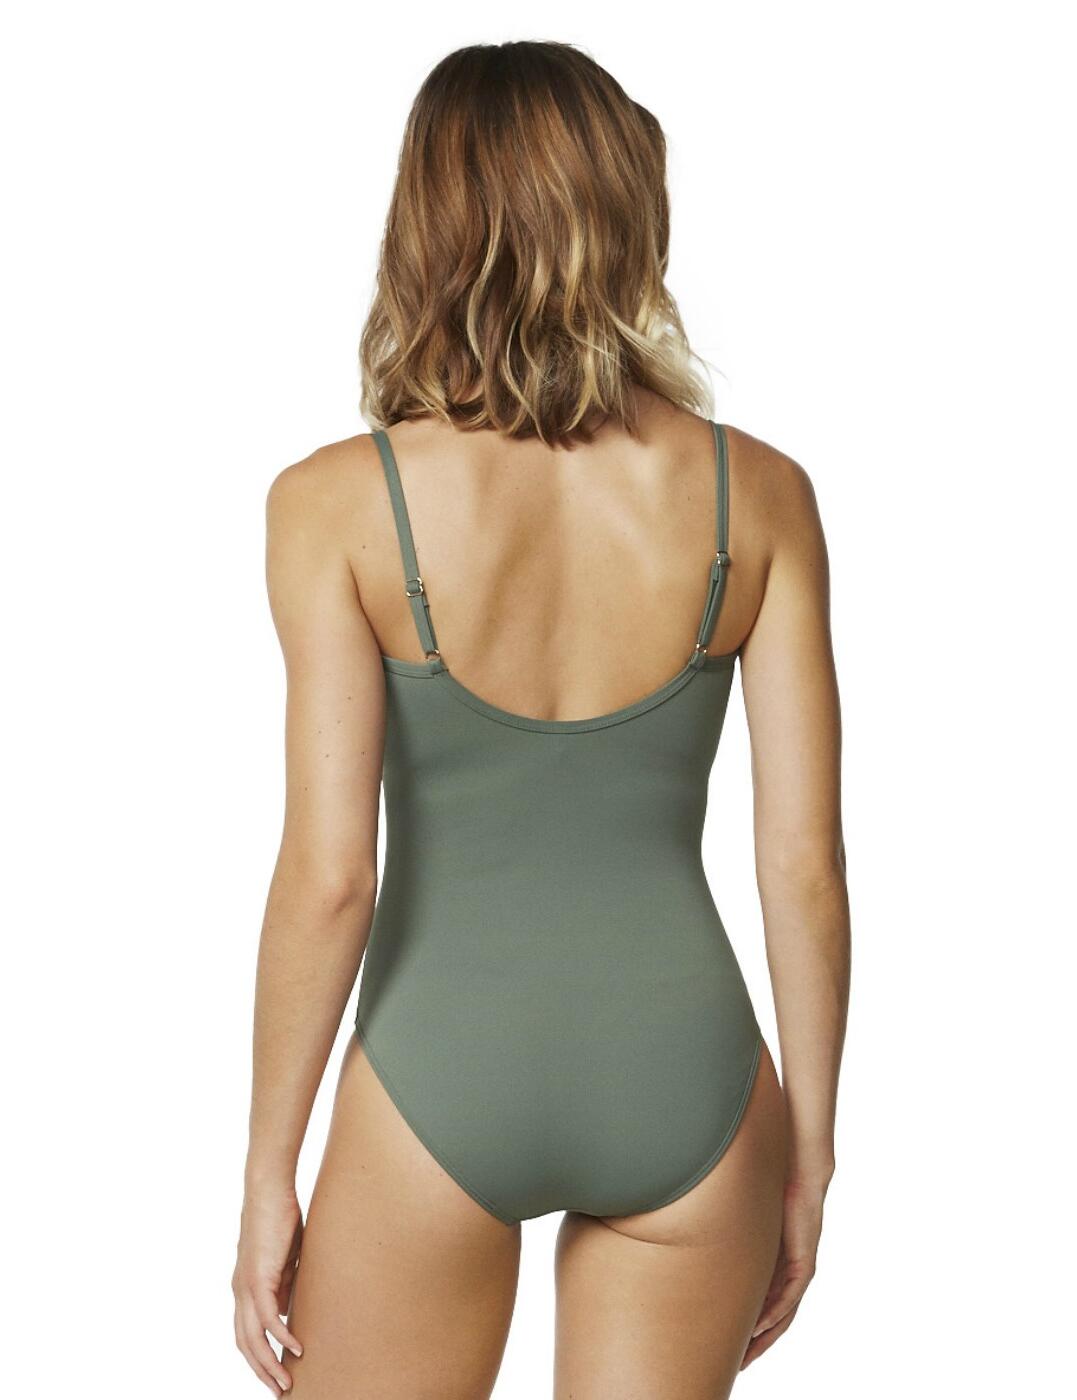 M4522CN Moontide Contours Gathered Wrap Swimsuit - M4522CN Olive